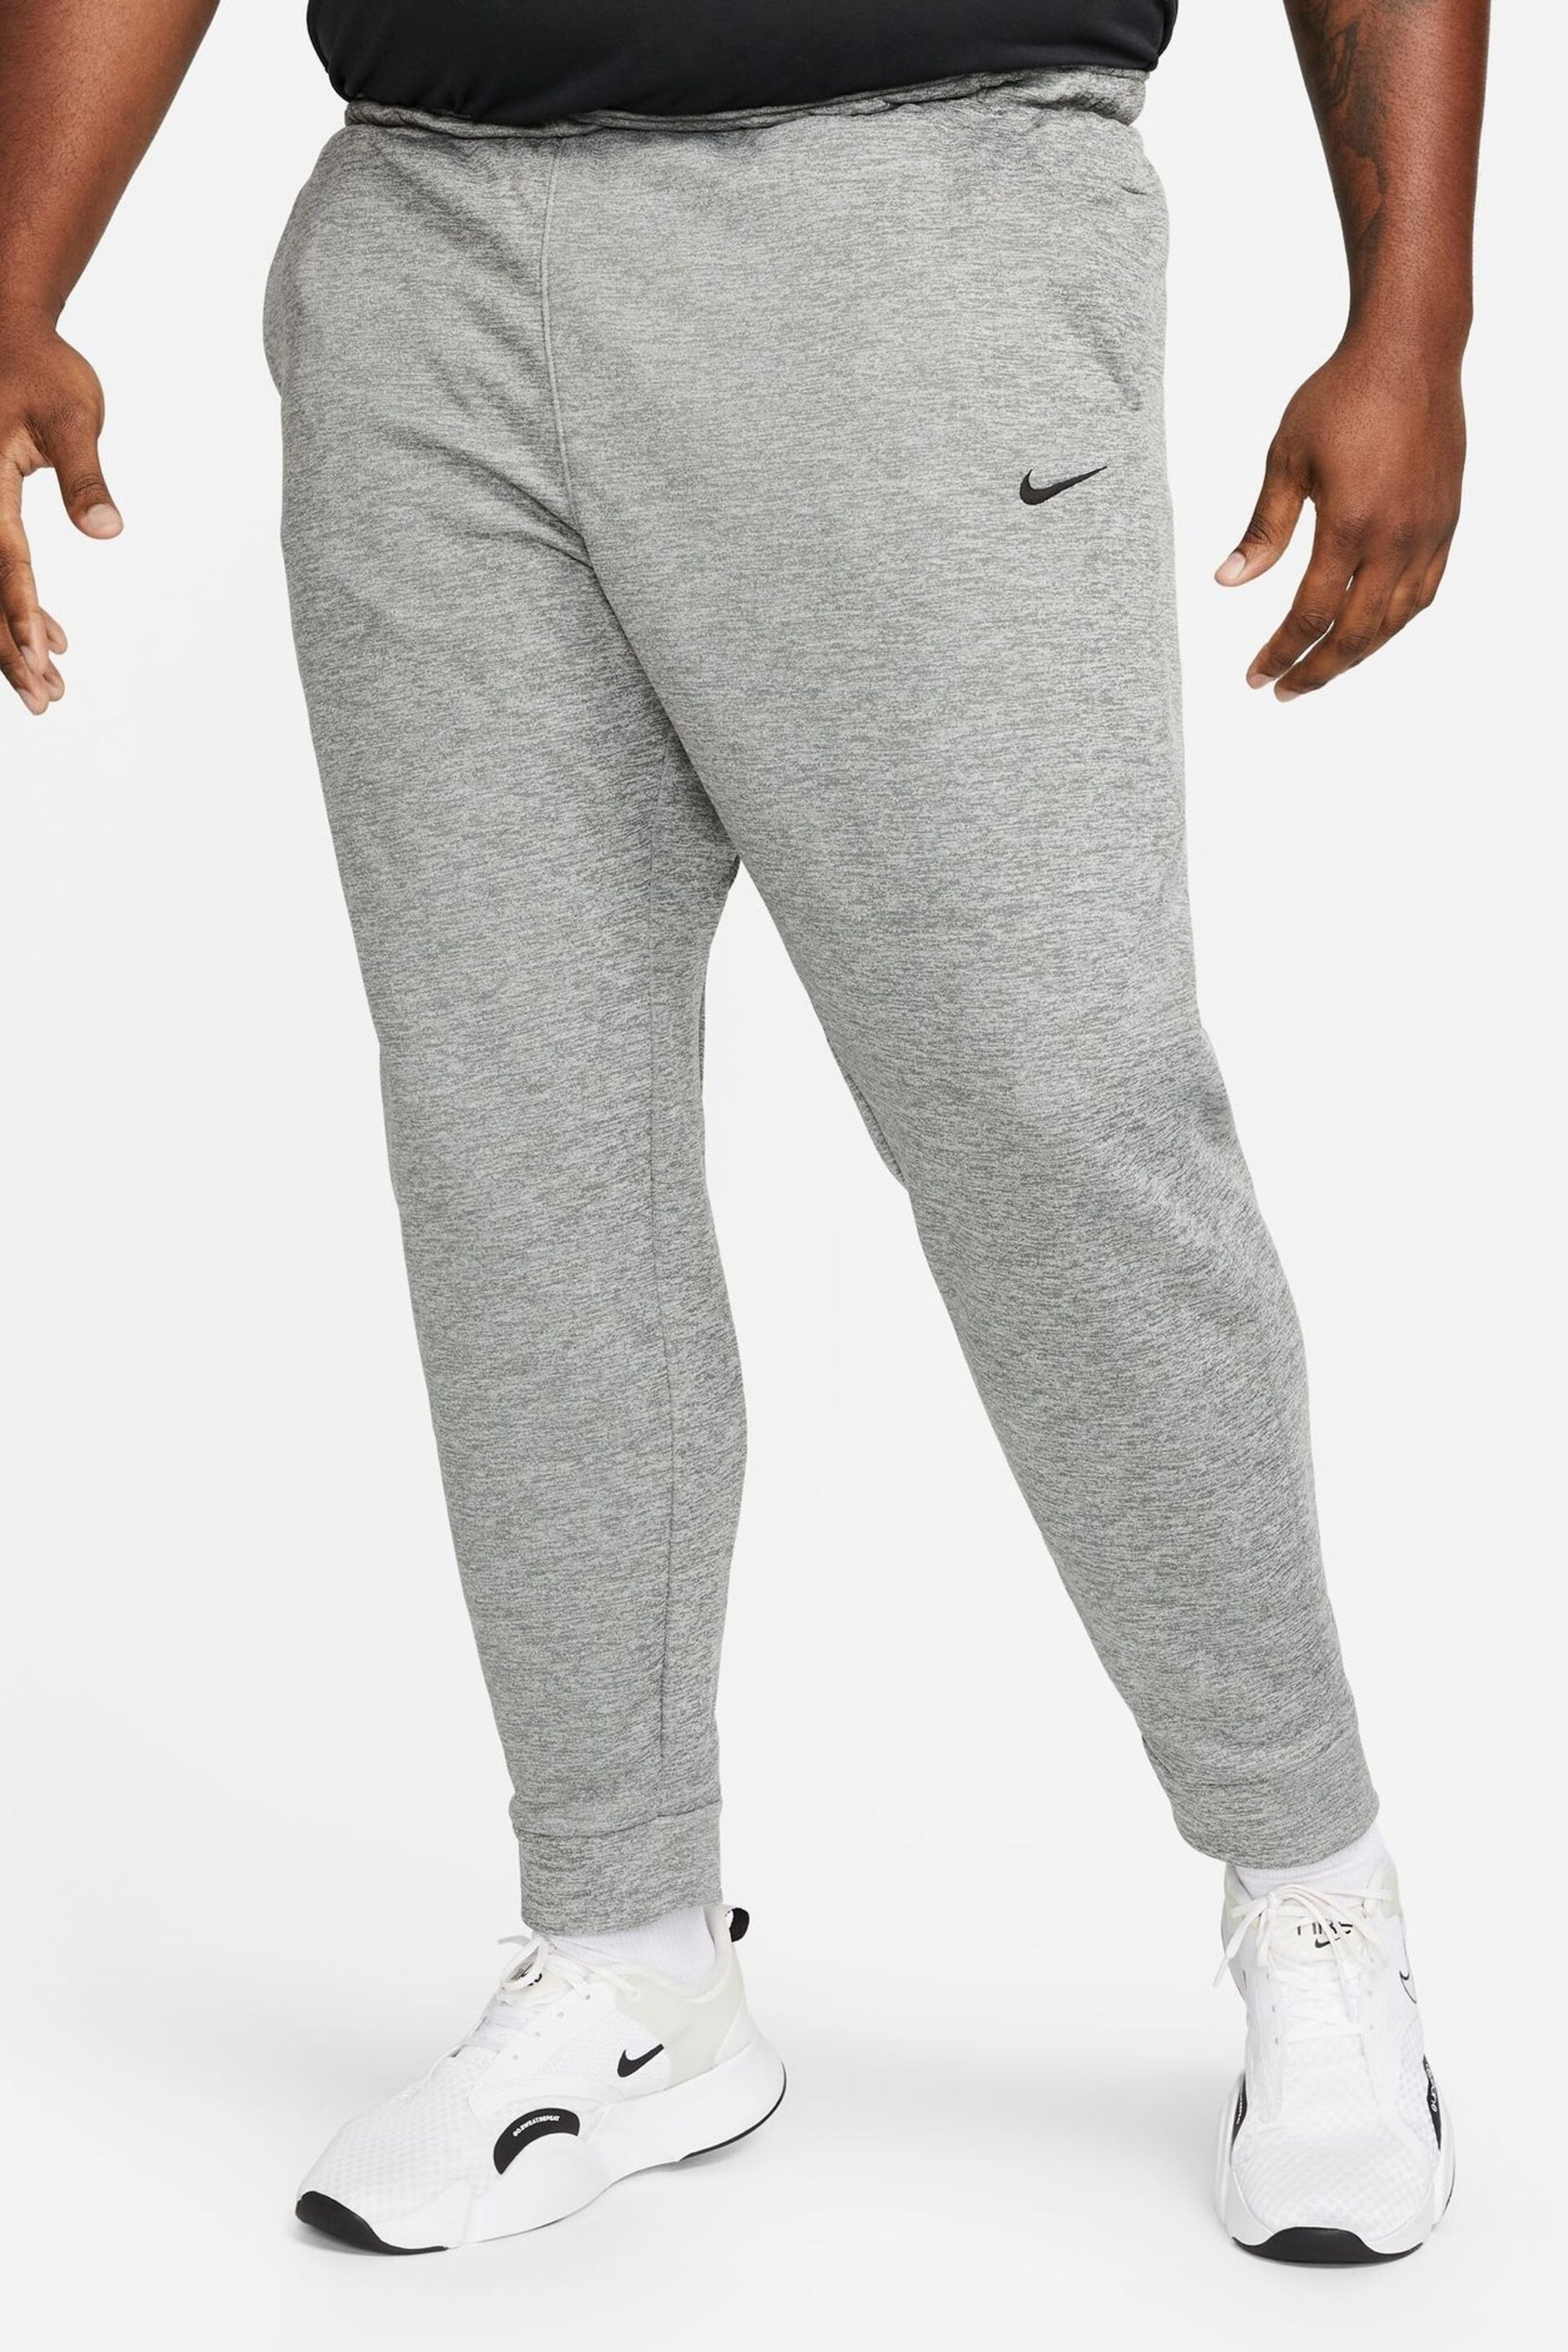 Nike Dark Grey Therma-FIT Training Joggers - Image 4 of 13